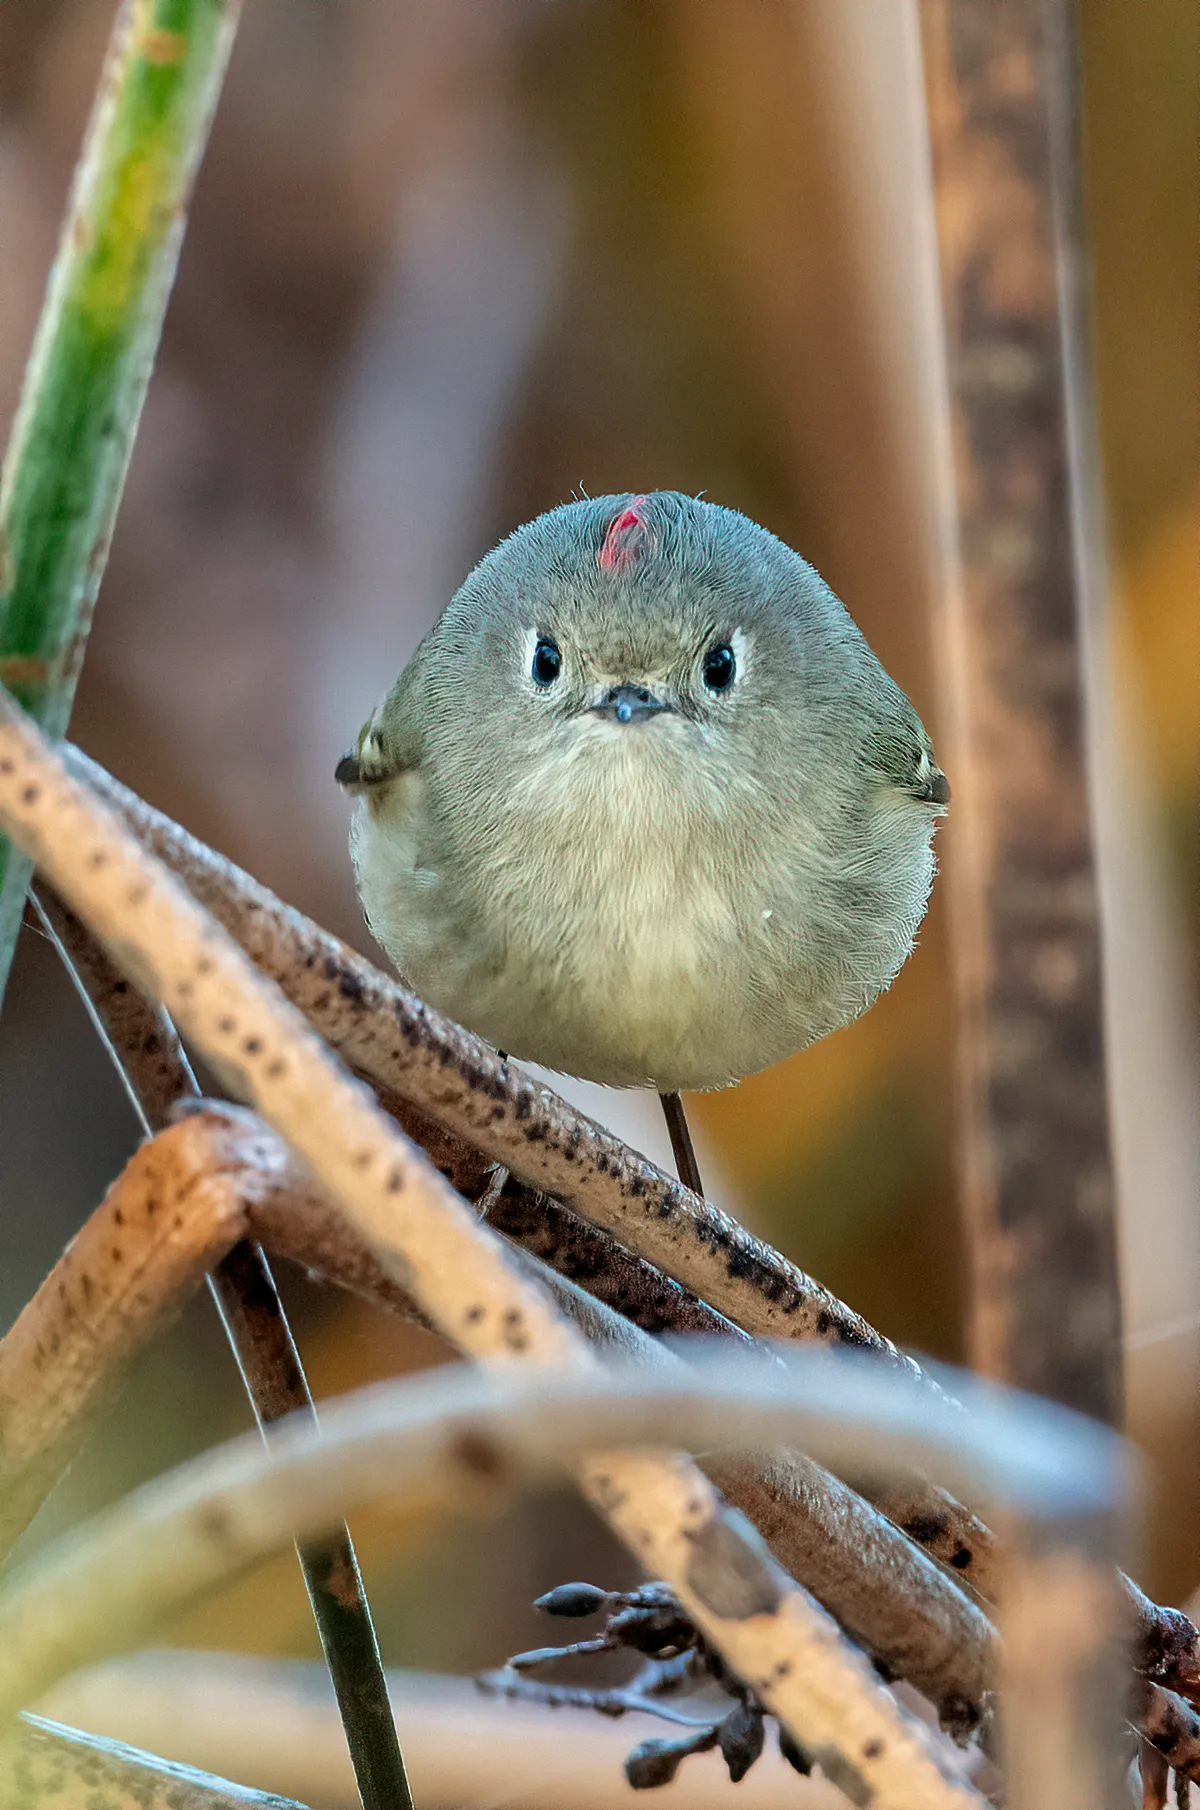 Did I Say That You Could Take My Picture? Ruby-crowned kinglet, California, USA. © Patrick Dirlam (USA).